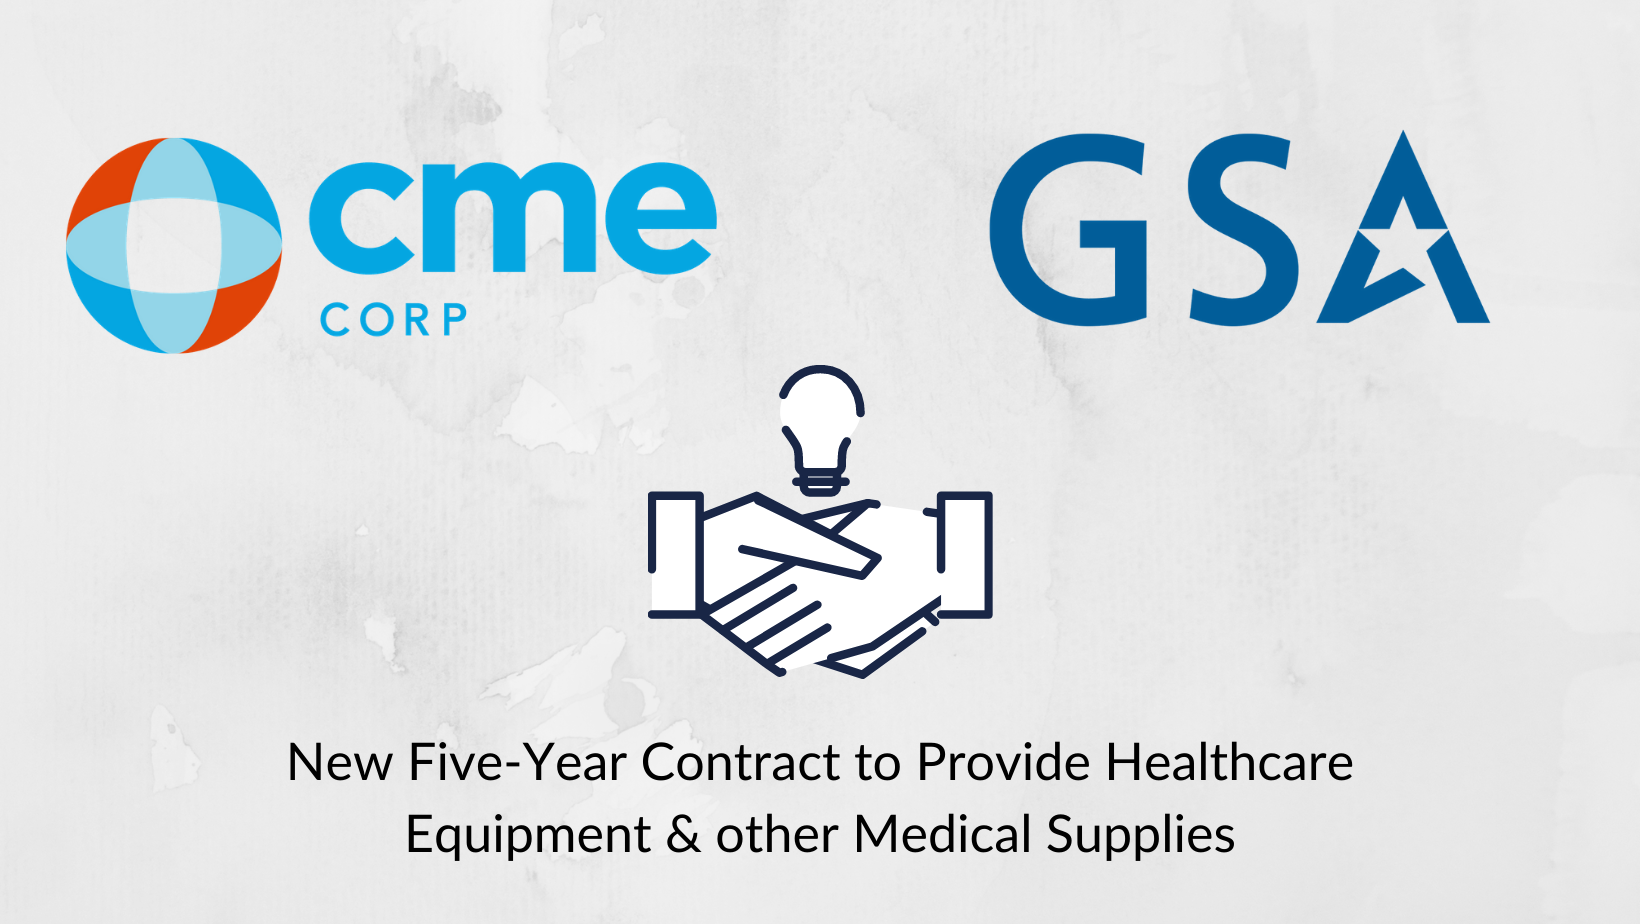 CME Corp announces a new five year contract with the General Services Administration to provide healthcare equipment and other medical supplies.